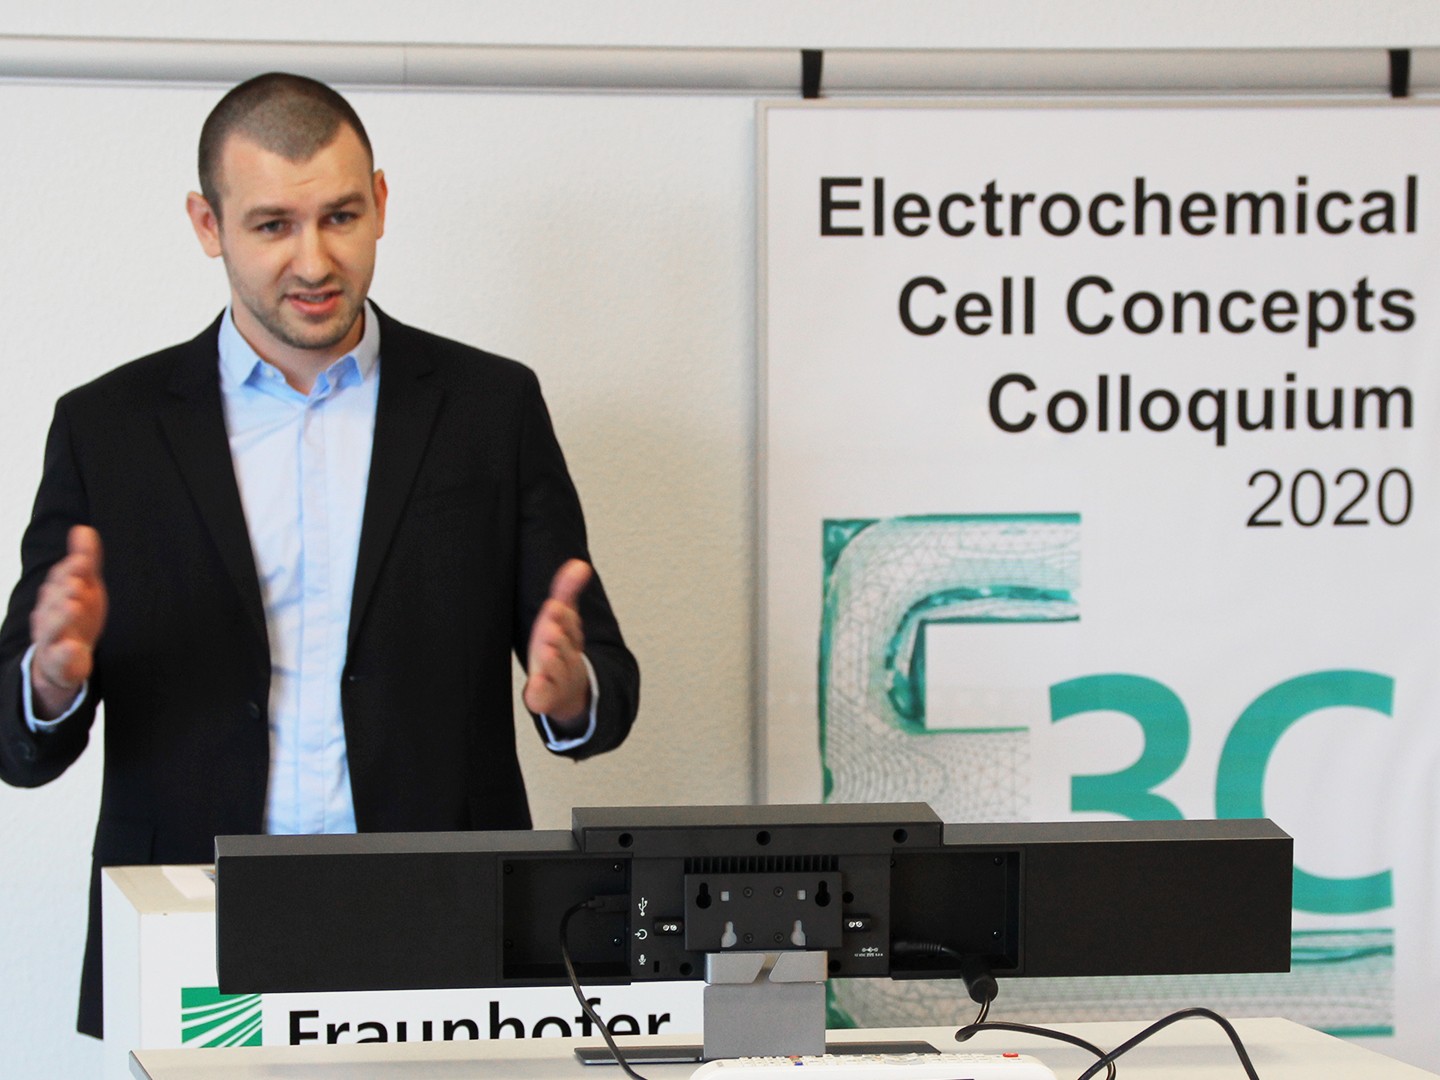 Jan Girschik, organizer of the virtual &quot;Electrochemical Cell Concepts Colloquium&quot;, opened the event.